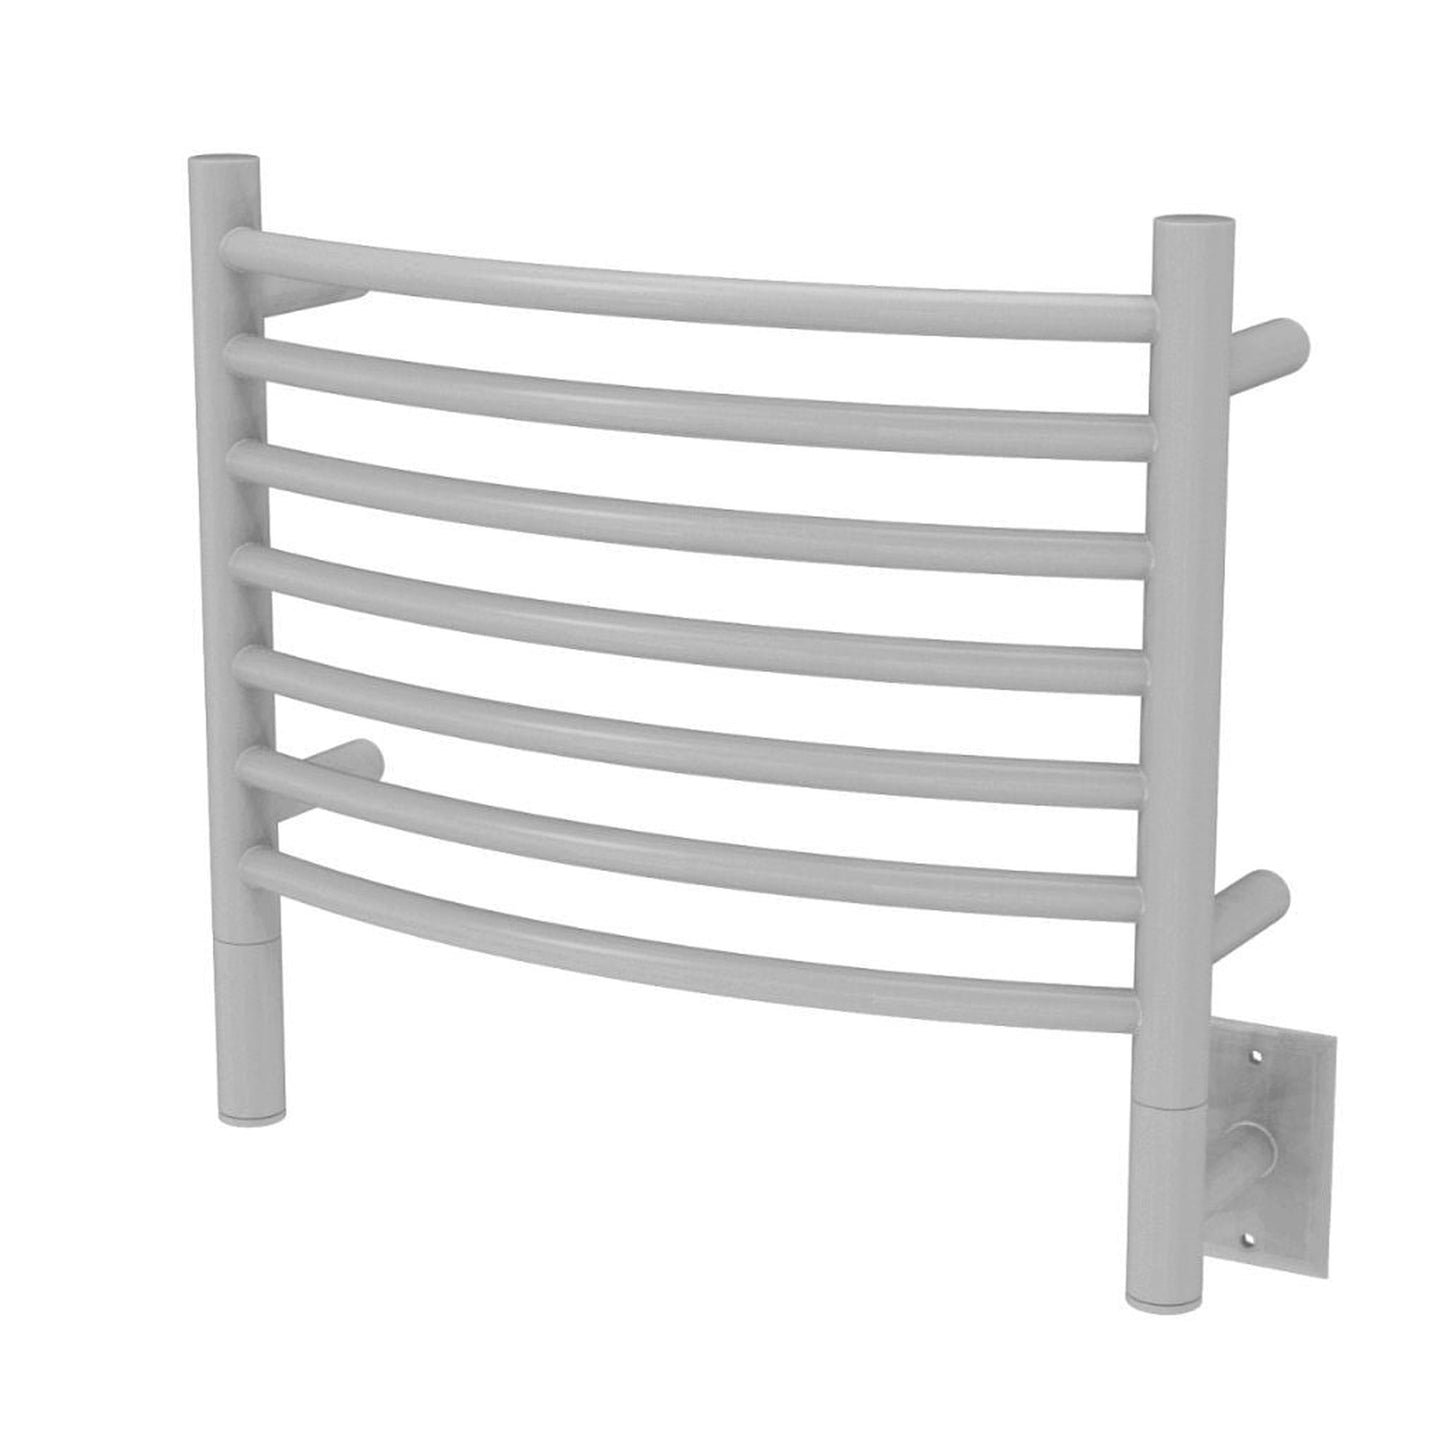 Amba Jeeves H Curved 7-Bar White Finish Hardwired Towel Warmer